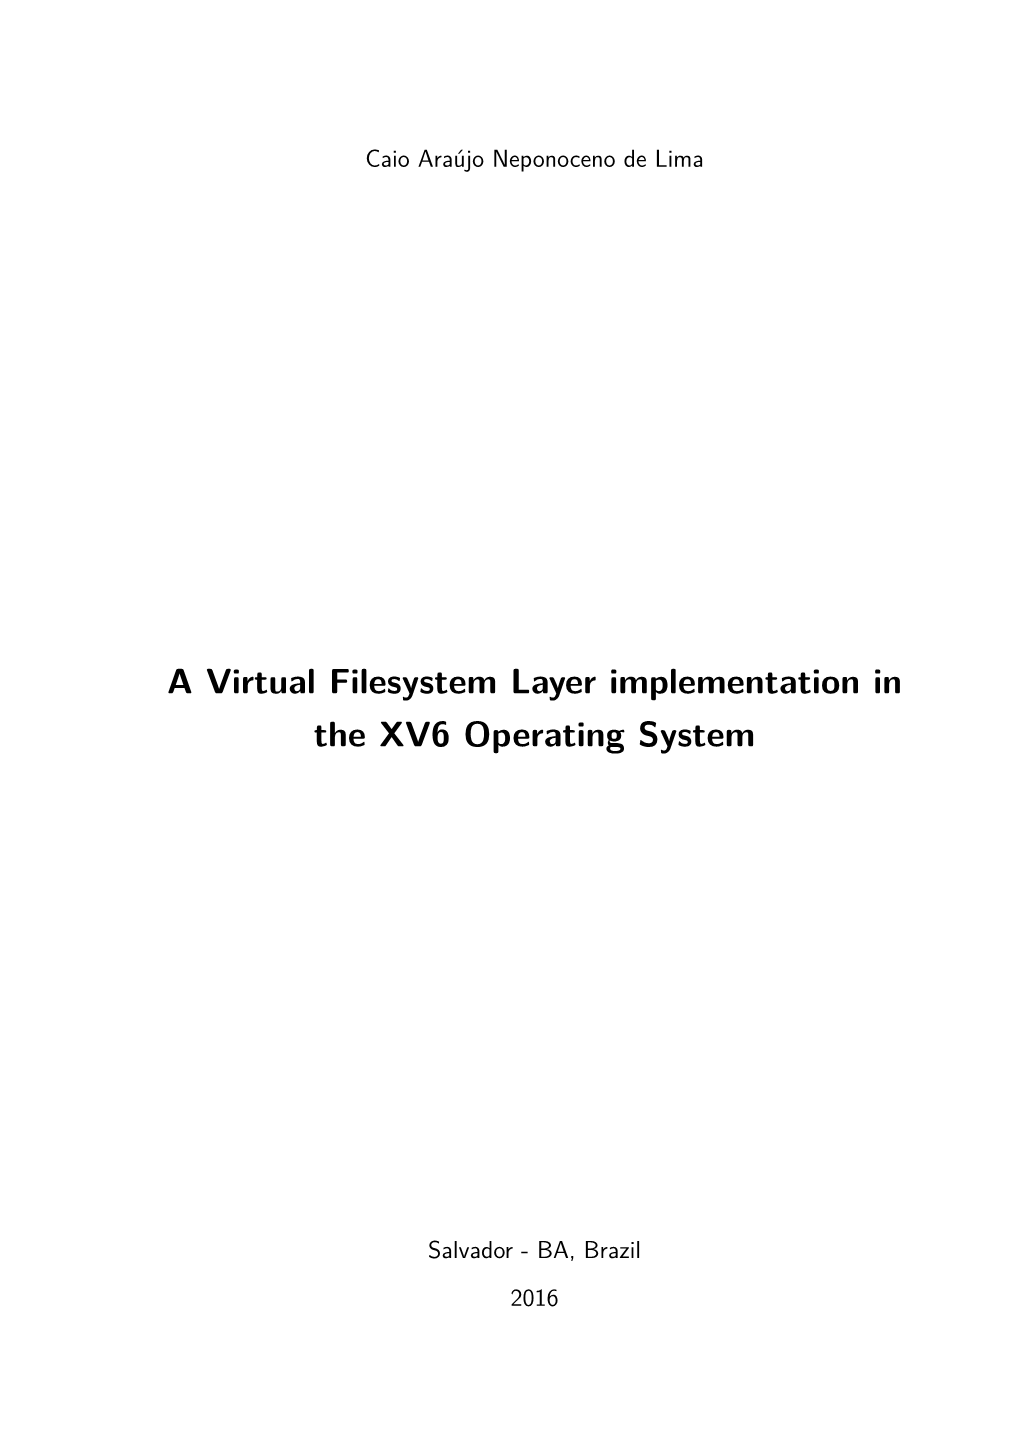 A Virtual Filesystem Layer Implementation in the XV6 Operating System